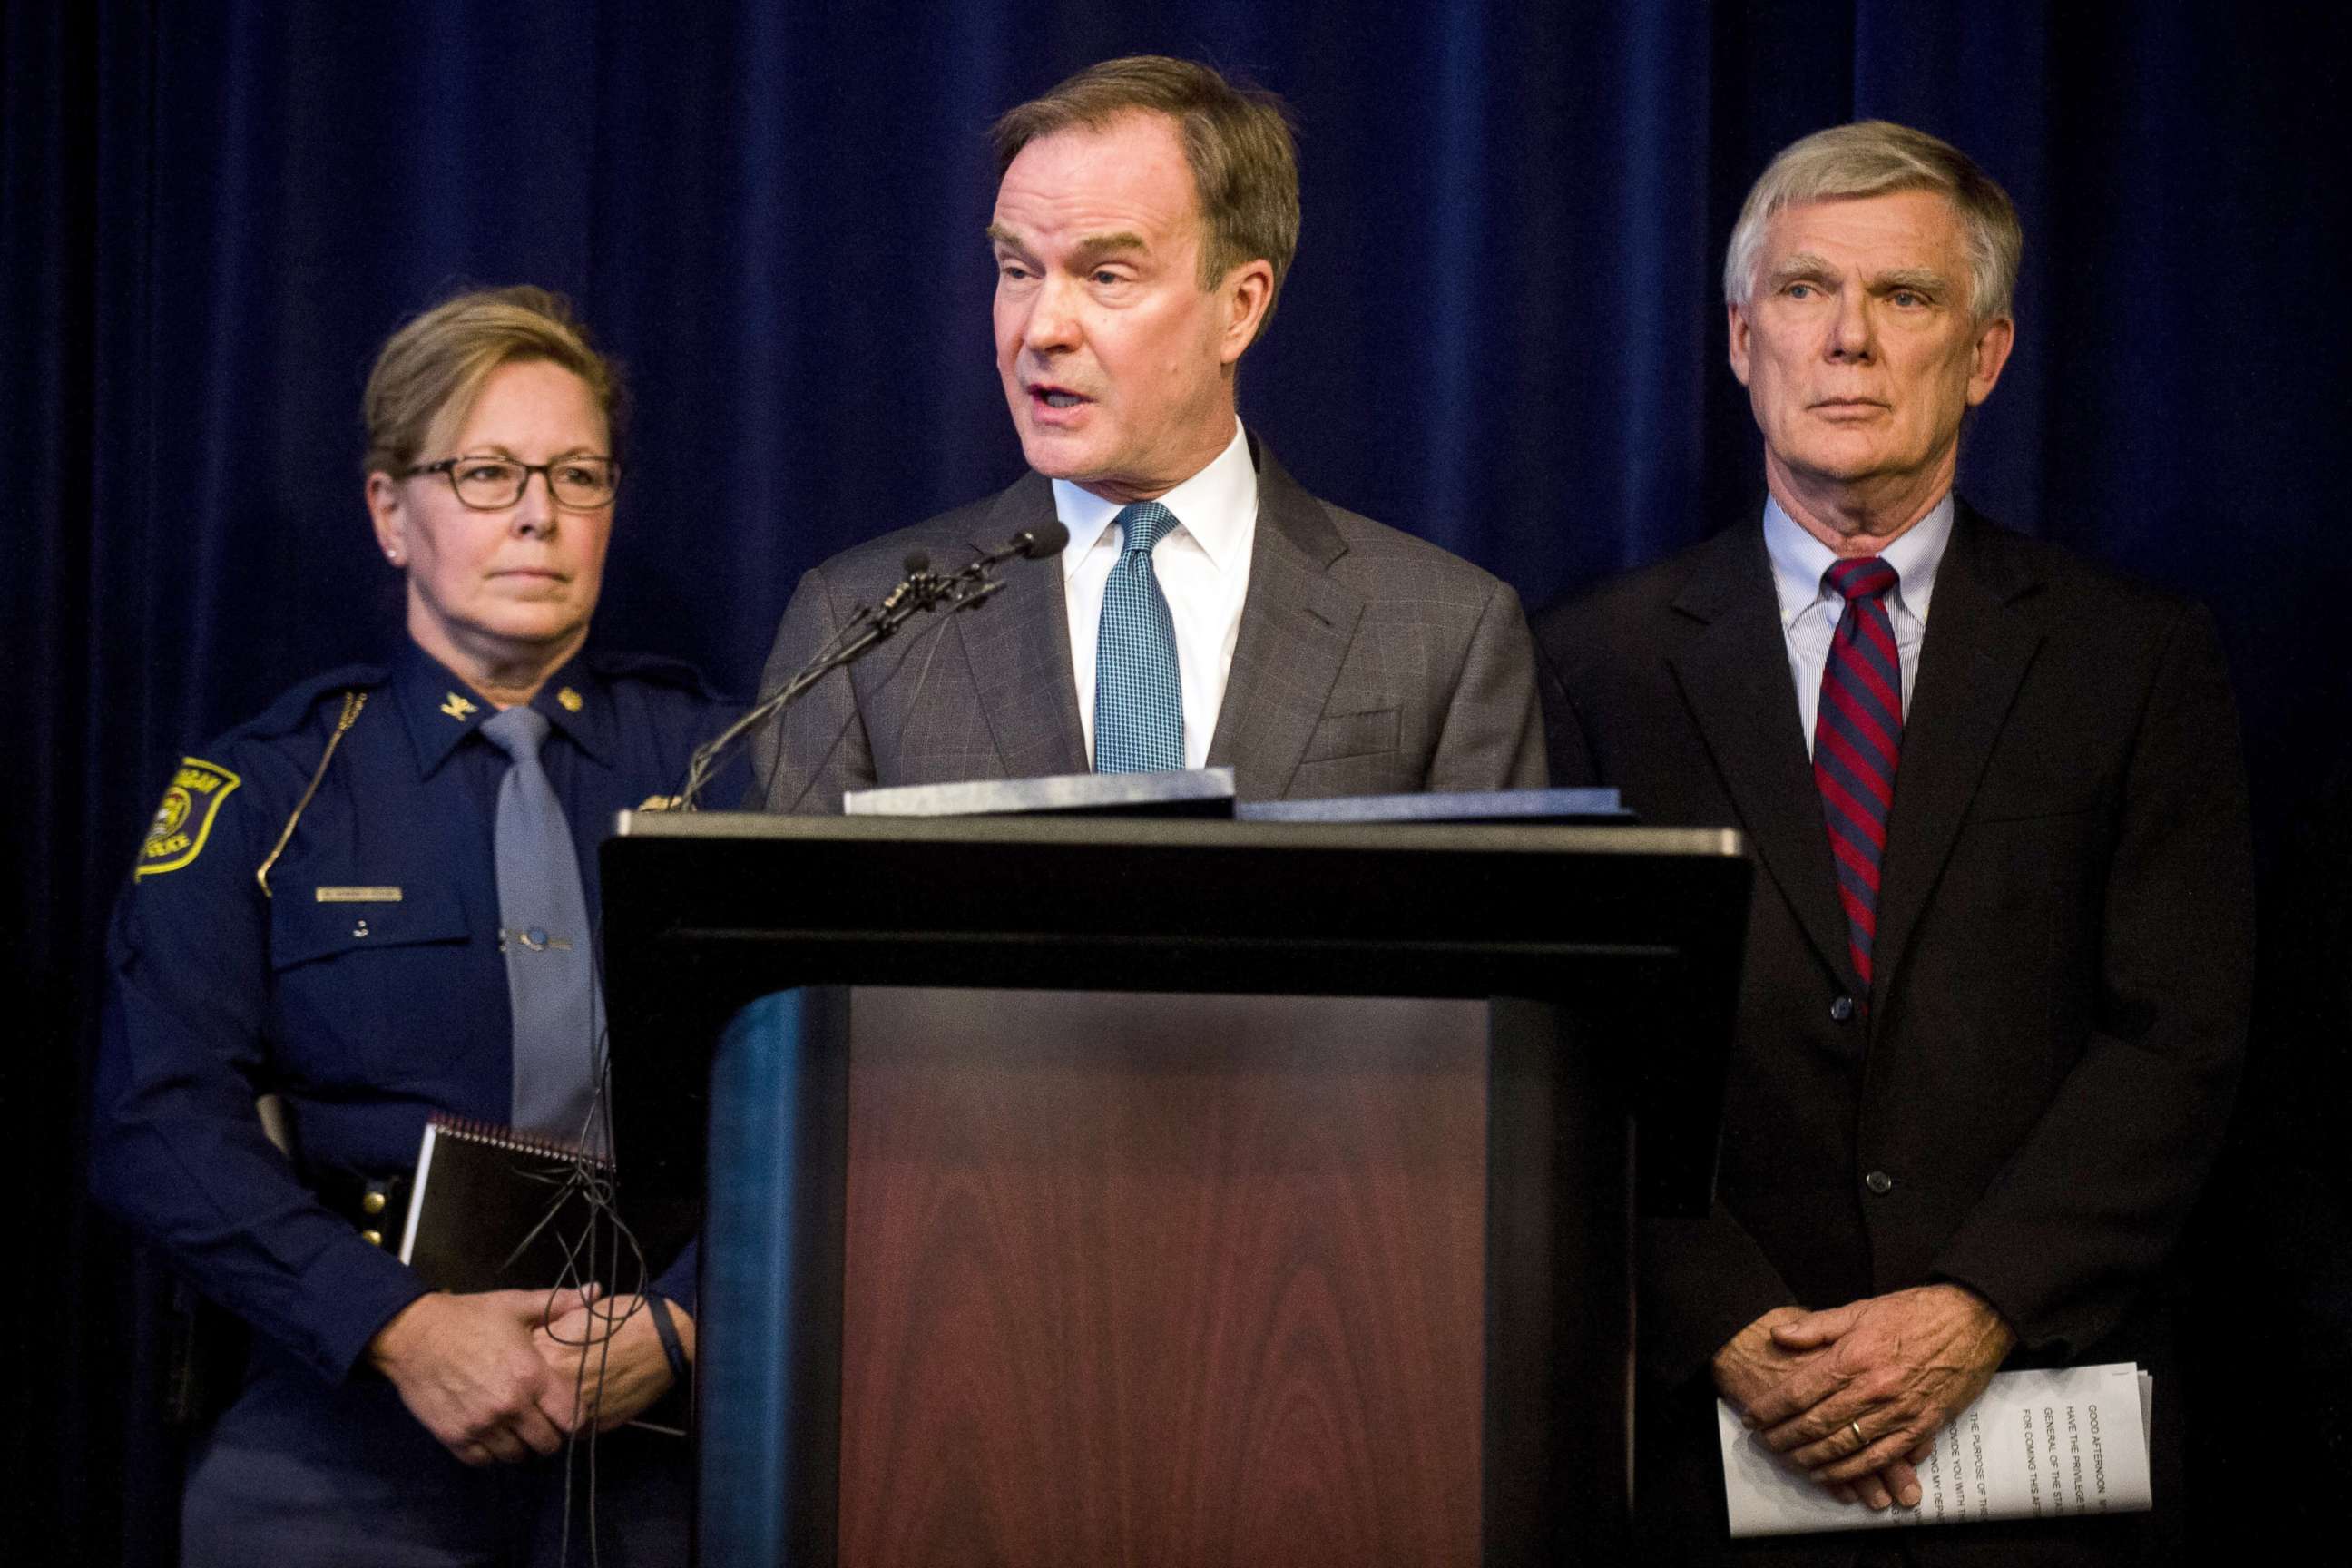 PHOTO: Attorney General Bill Schuette announces an open and ongoing investigation into the systemic issues with sexual misconduct at Michigan State University that began in 2017, Jan. 27, 2018, at the G. Mennen Williams Building in Lansing, Mich. 